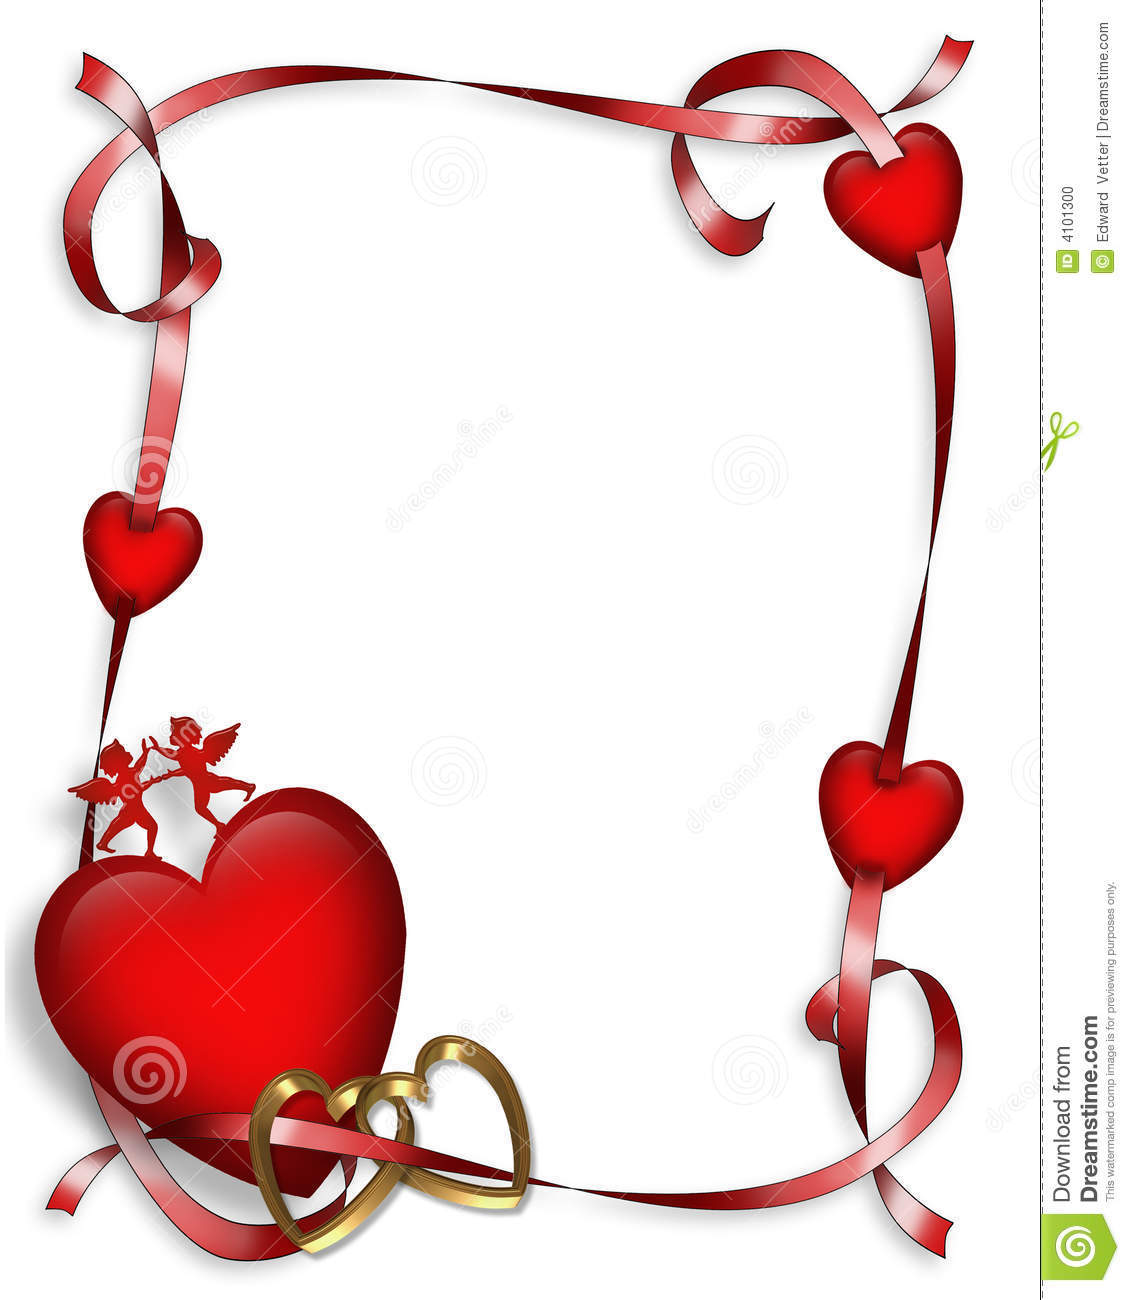 Free clipart valentines day border 1 » Clipart Station.